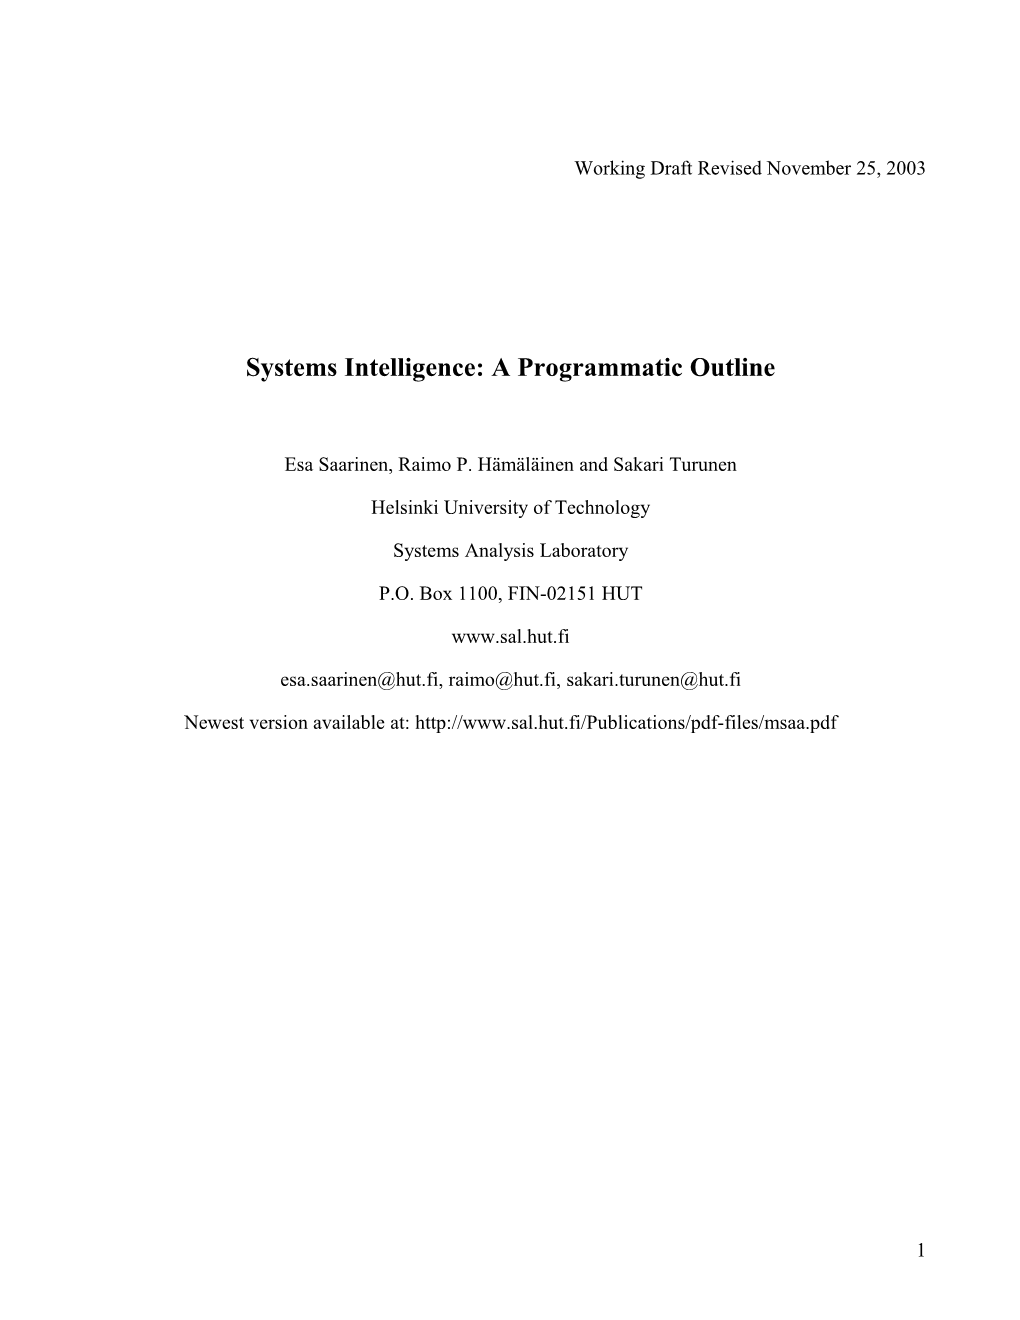 Article: About Systems Intelligence